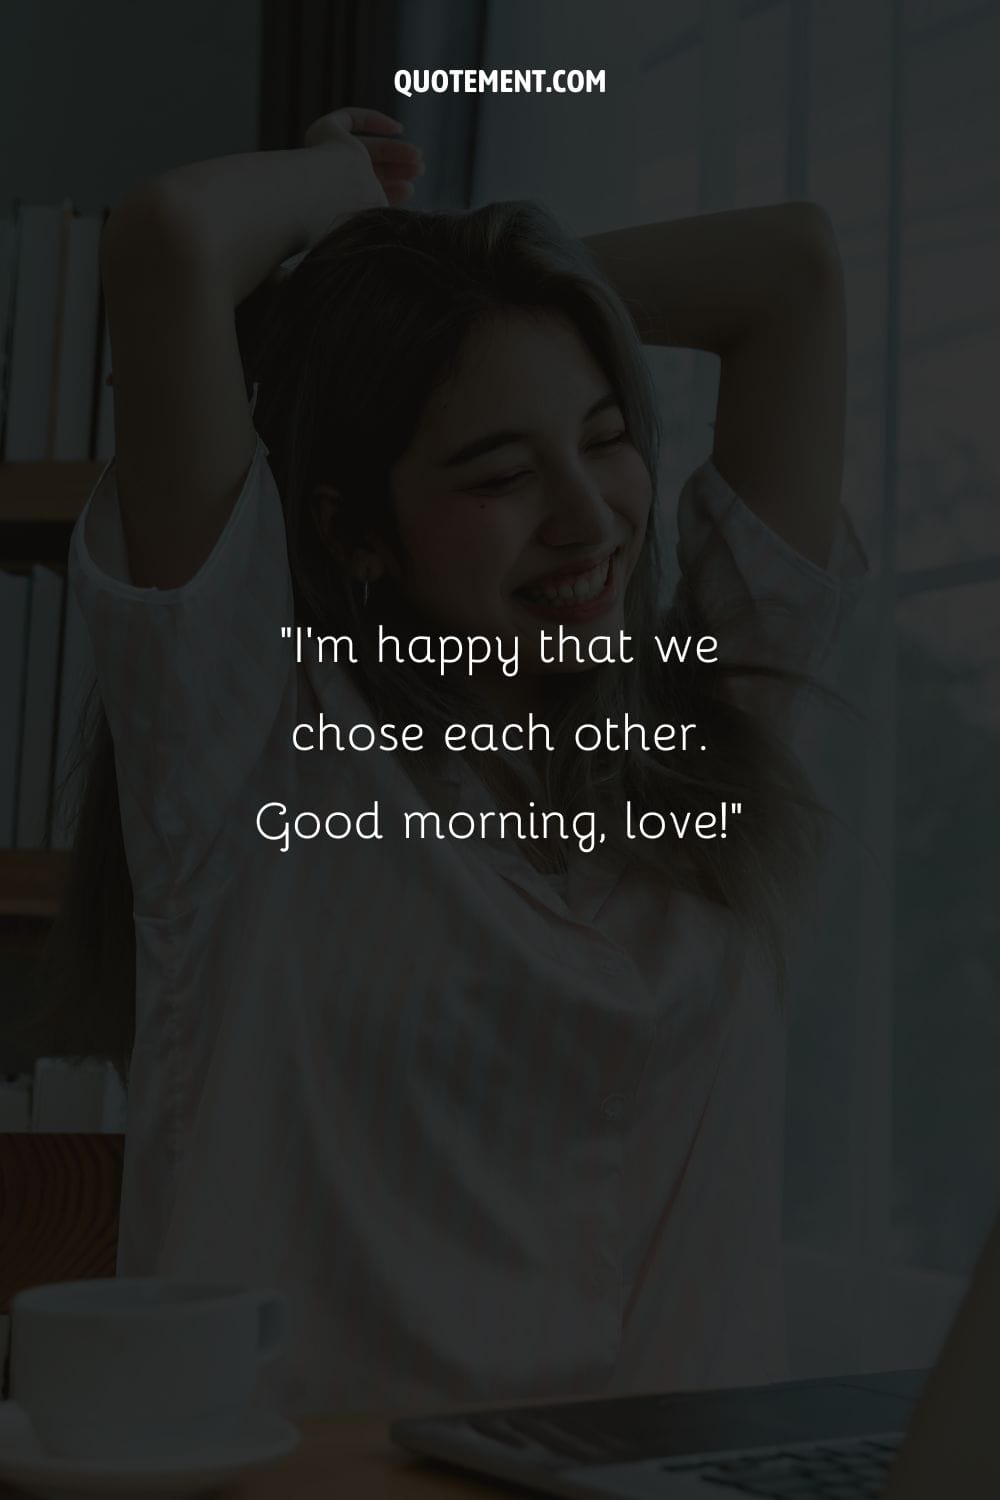 I’m happy that we chose each other. Good morning, love